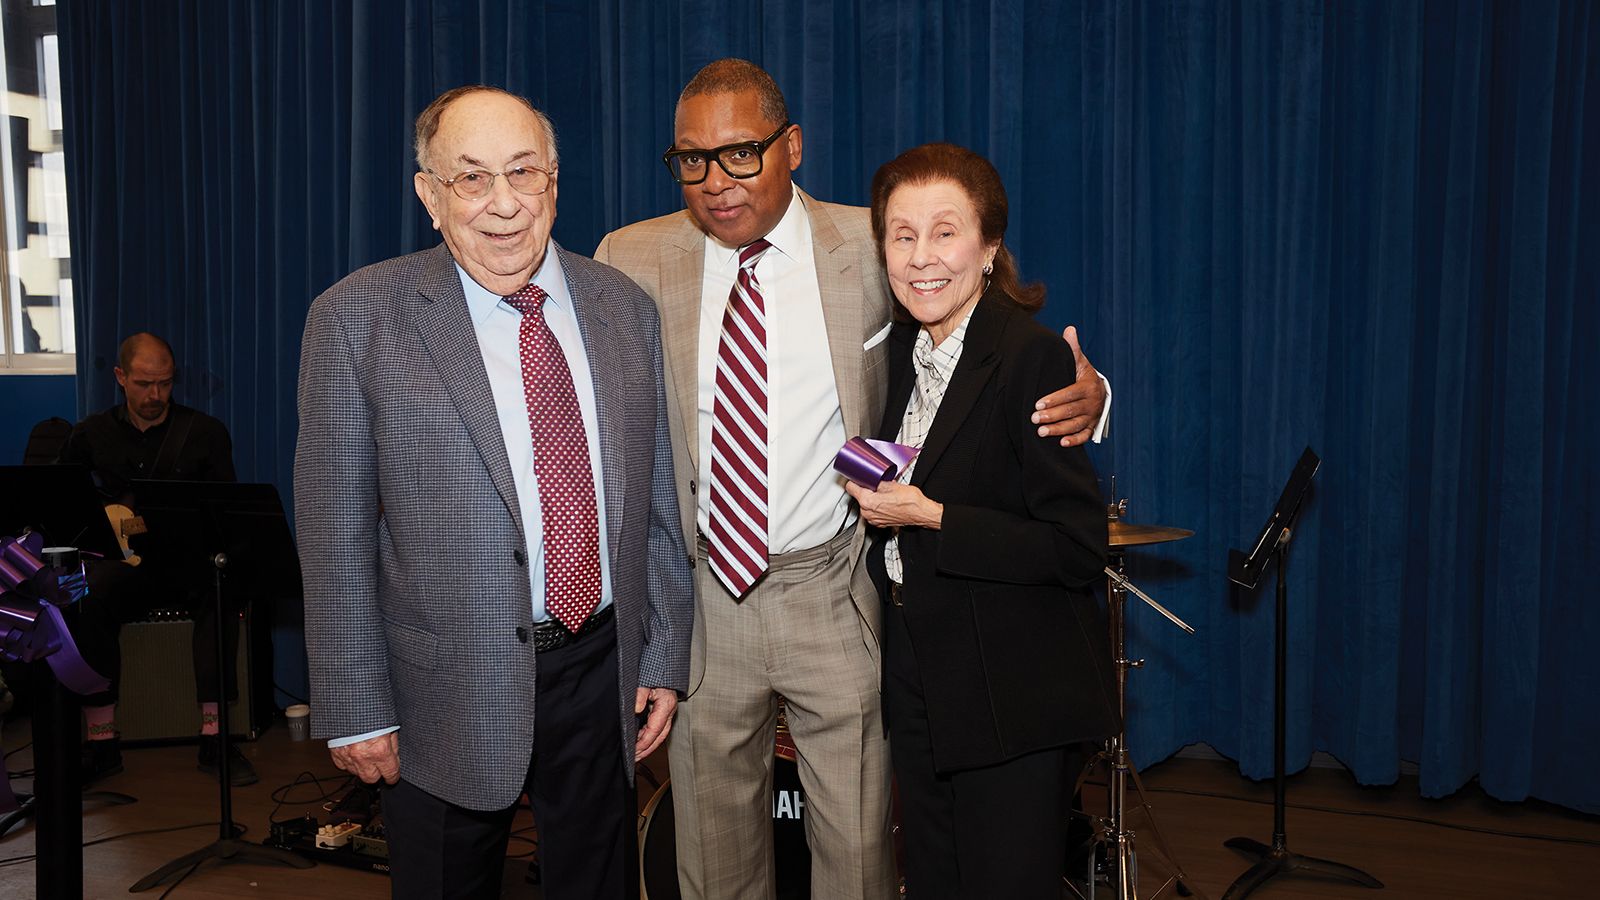 The late Bob Appel, Wynton Marsalis, and Helen Appel at the opening of the new Appel Rehearsal Hall.